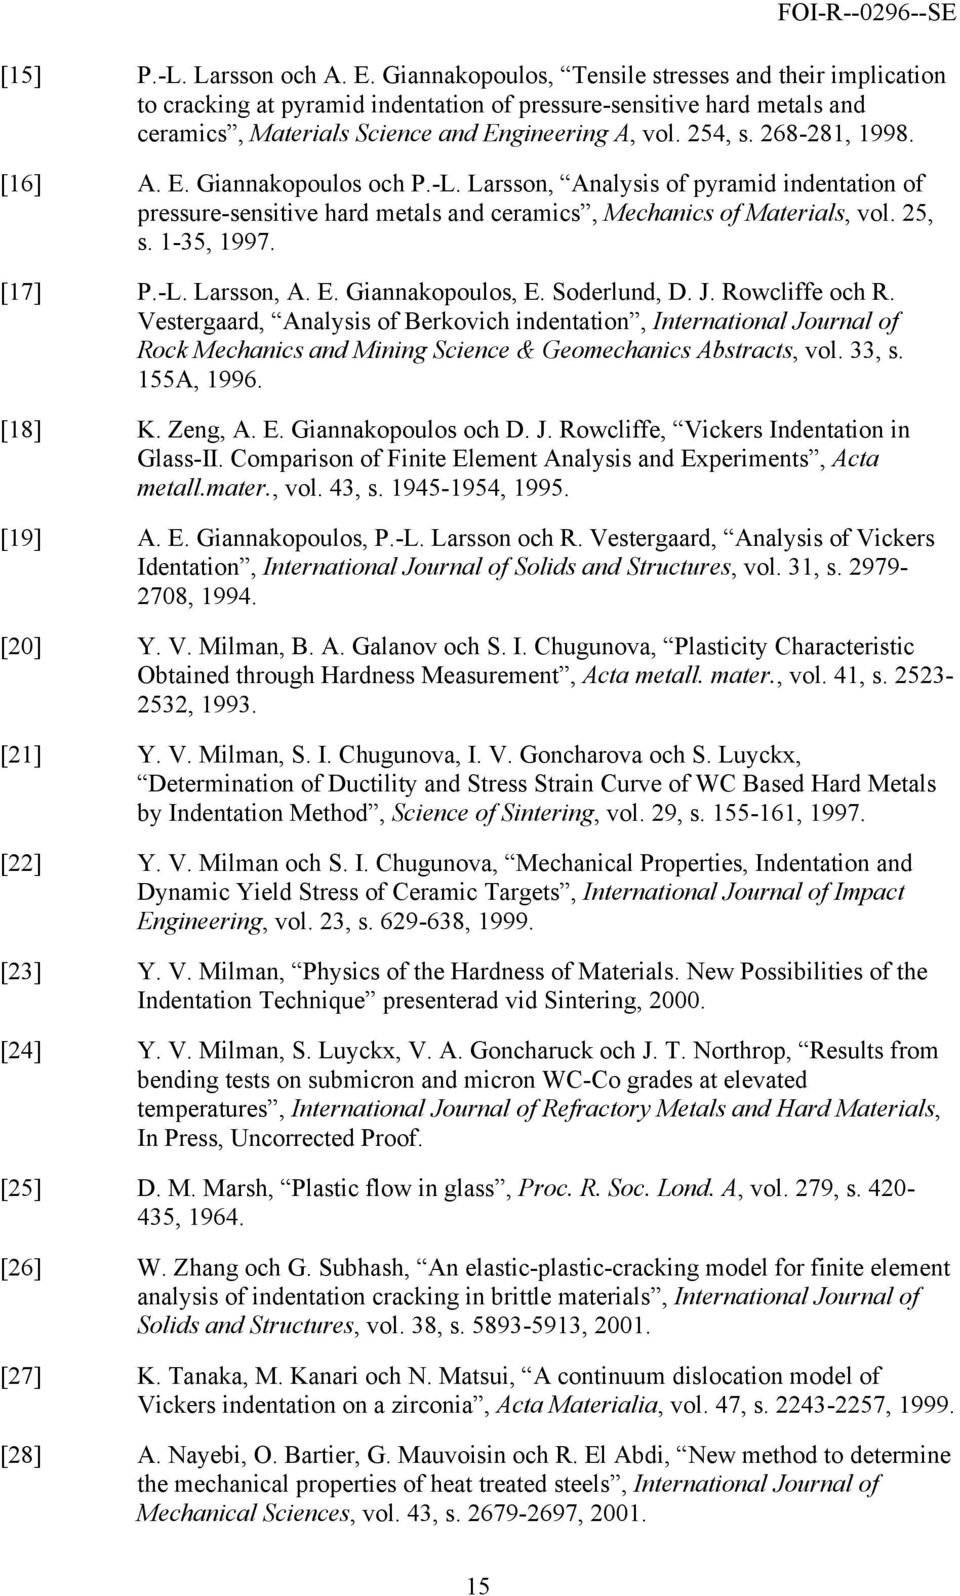 268-281, 1998. [16] A. E. Giannakopoulos och P.-L. Larsson, Analysis of pyramid indentation of pressure-sensitive hard metals and ceramics, Mechanics of Materials, vol. 25, s. 1-35, 1997. [17] P.-L. Larsson, A. E. Giannakopoulos, E.